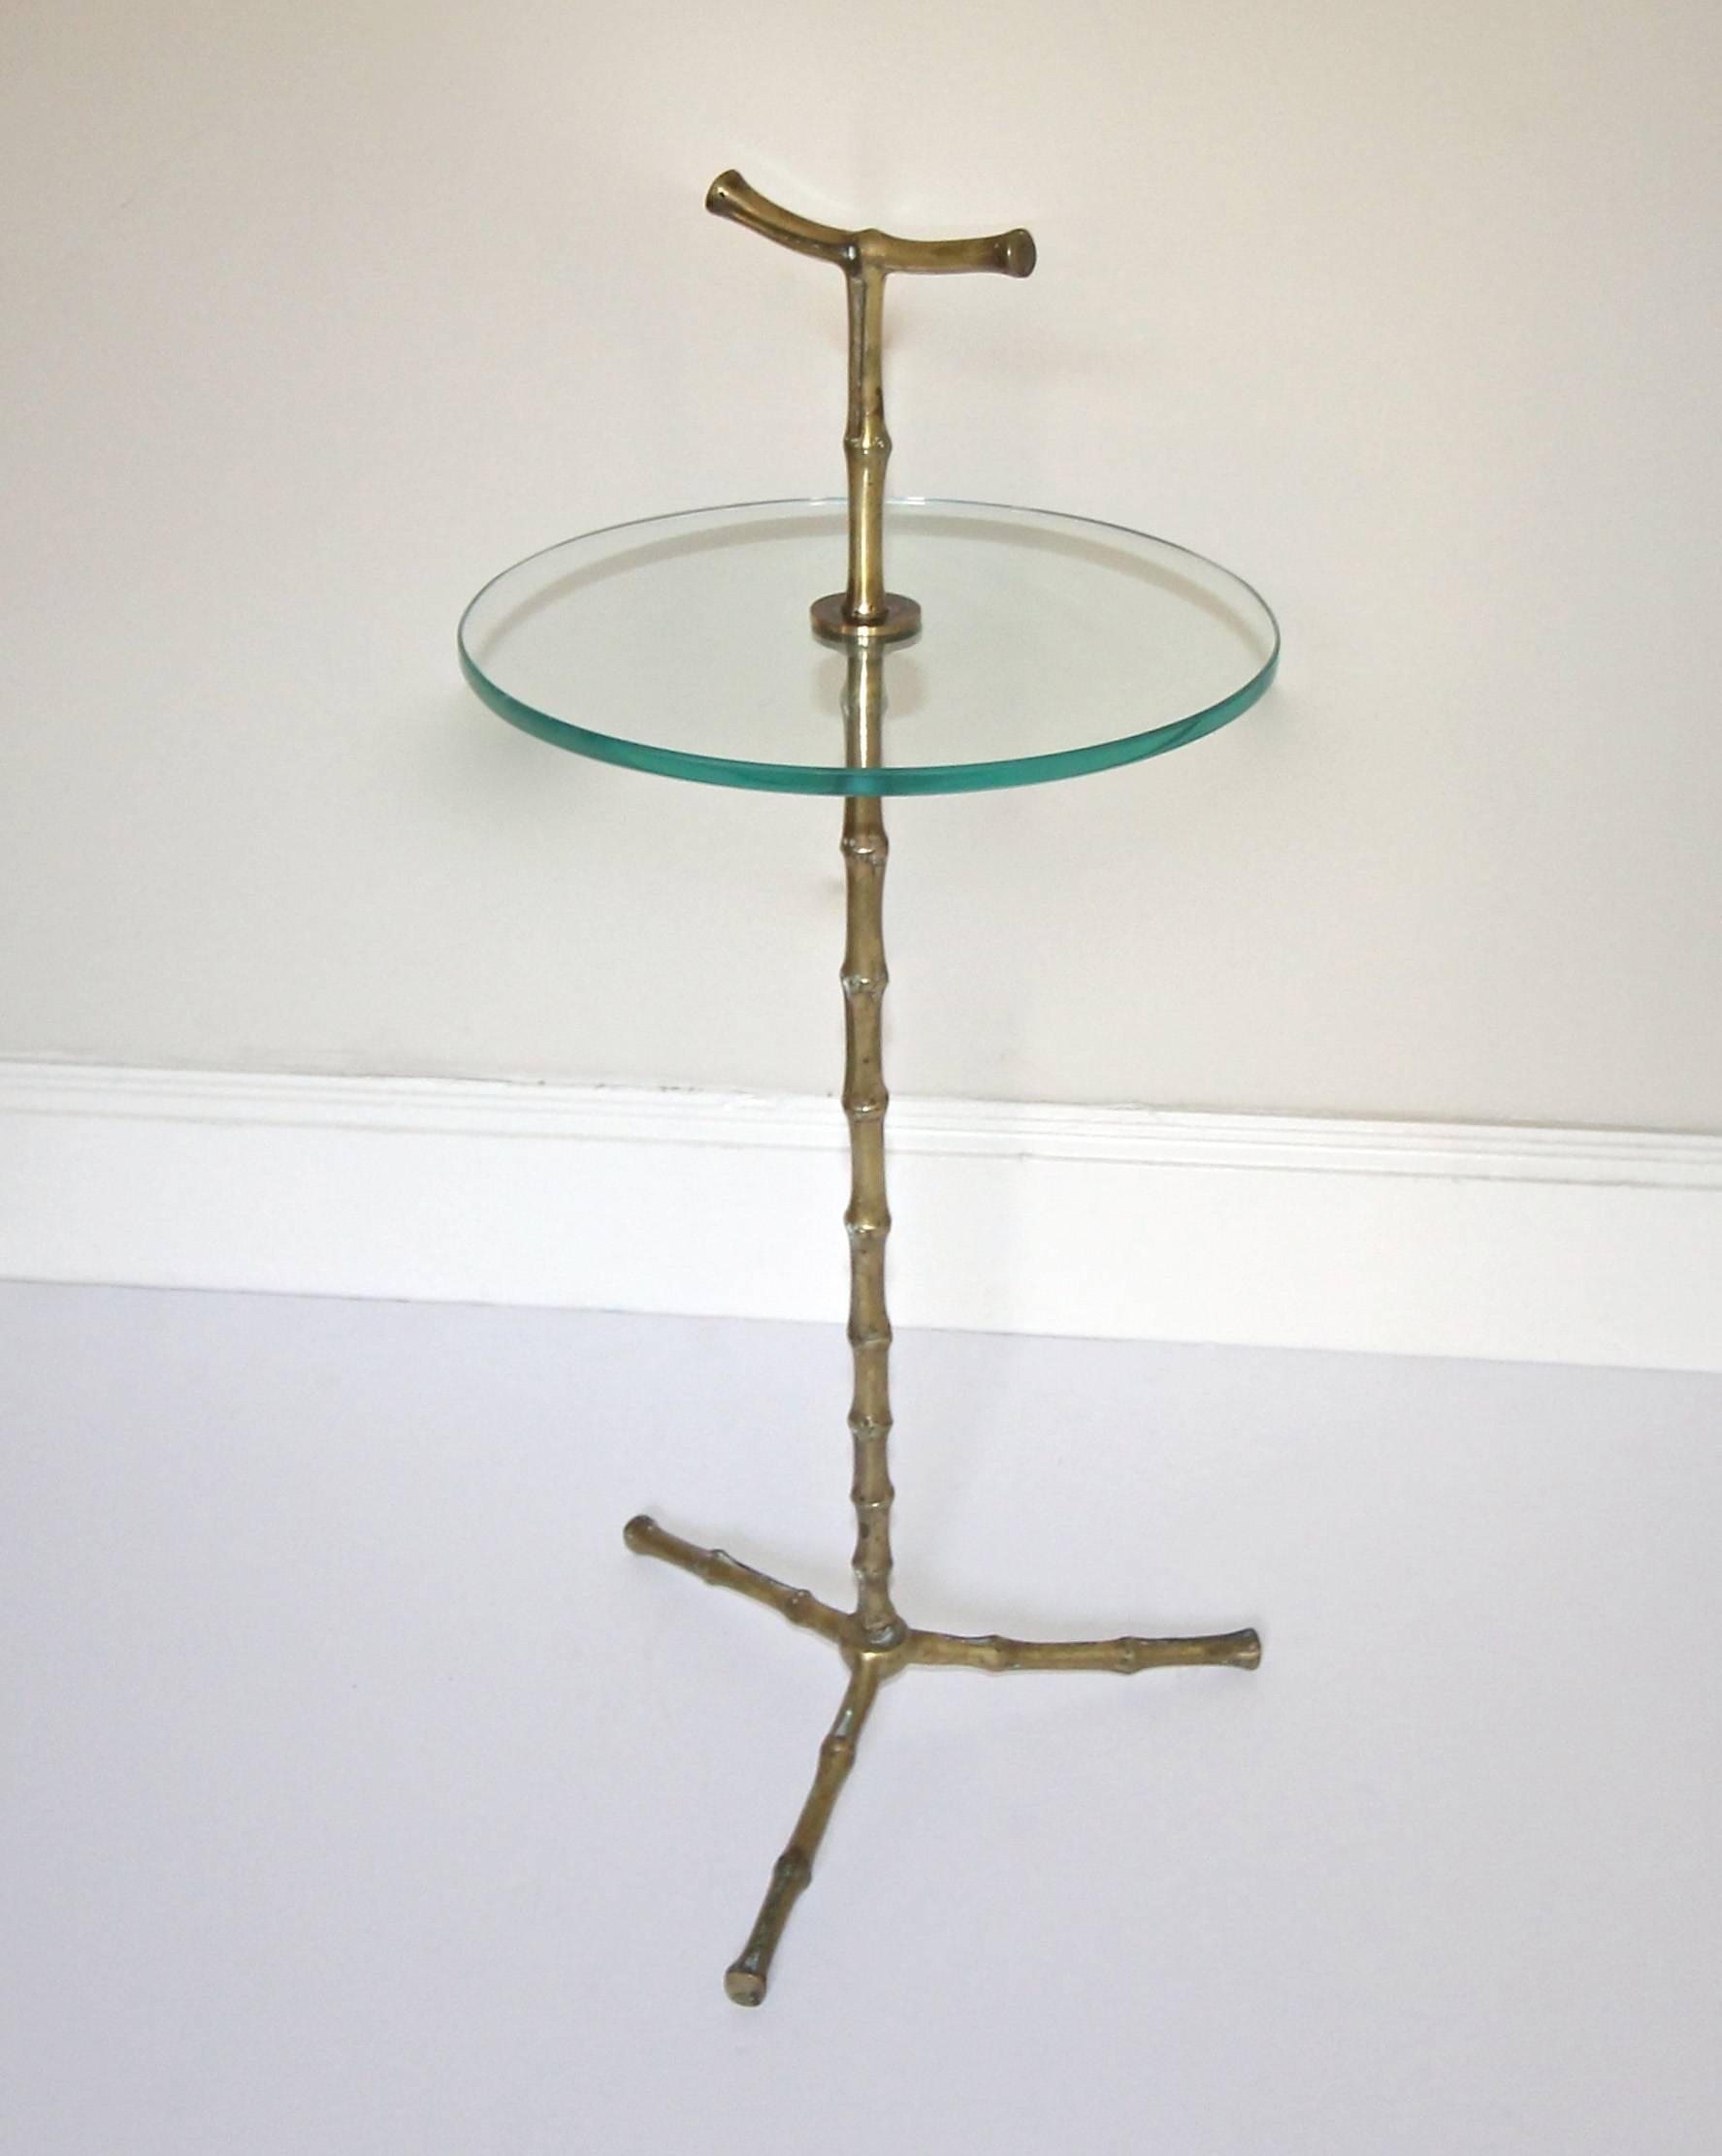 Maison Baguès faux-bamboo bronze or brass side table with a circular glass top and tripod base.
Measures: Height top of glass 19", over all height top of handle 24",
diameter of glass 11".